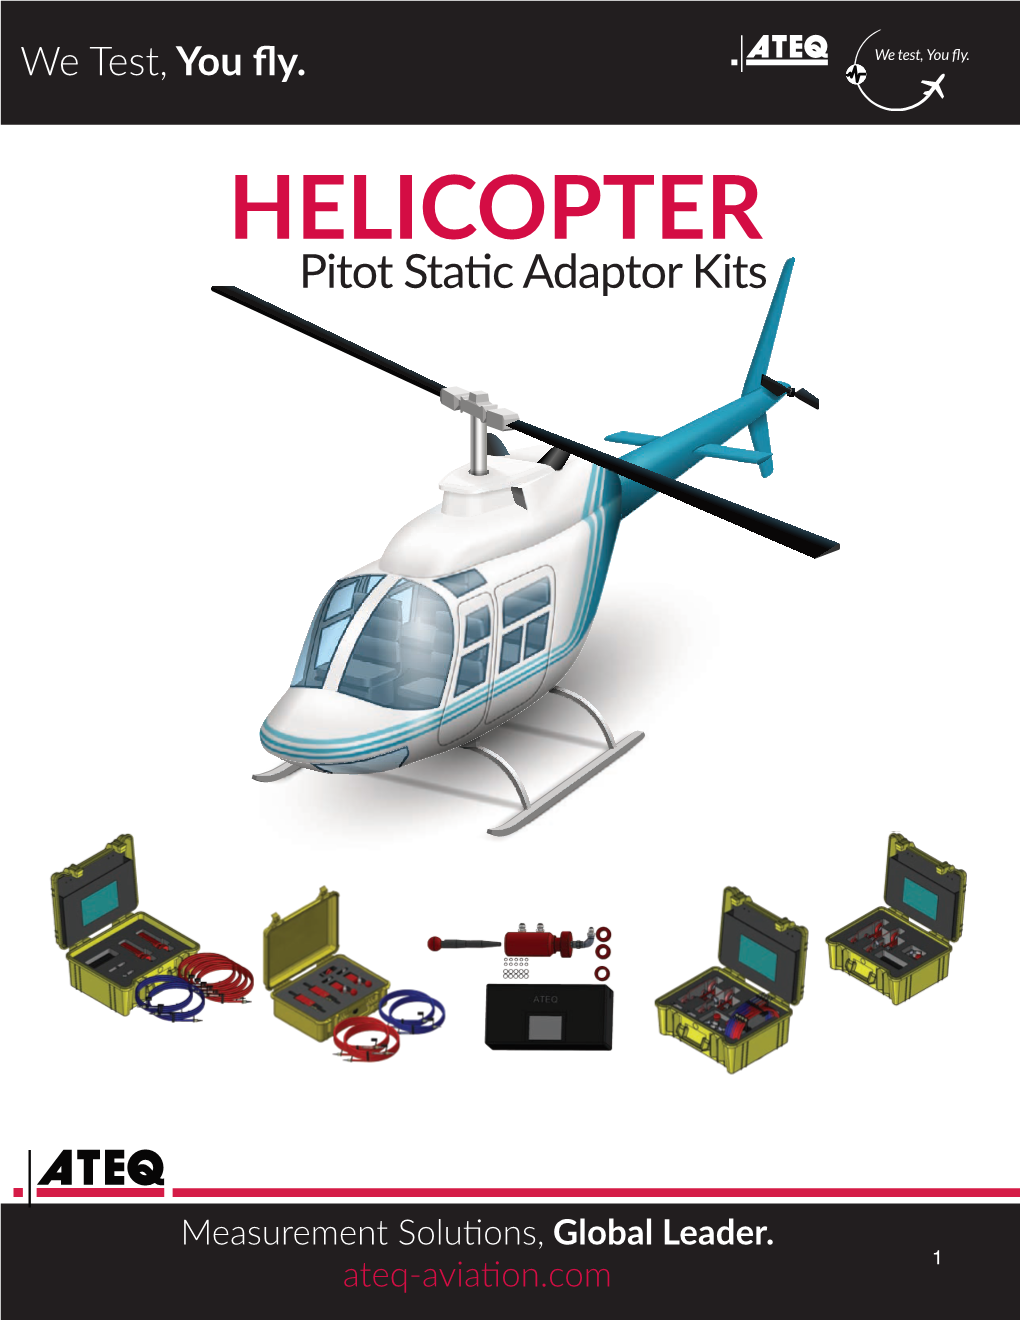 Helicopter Pitot Static Kits ATEQ Aviation